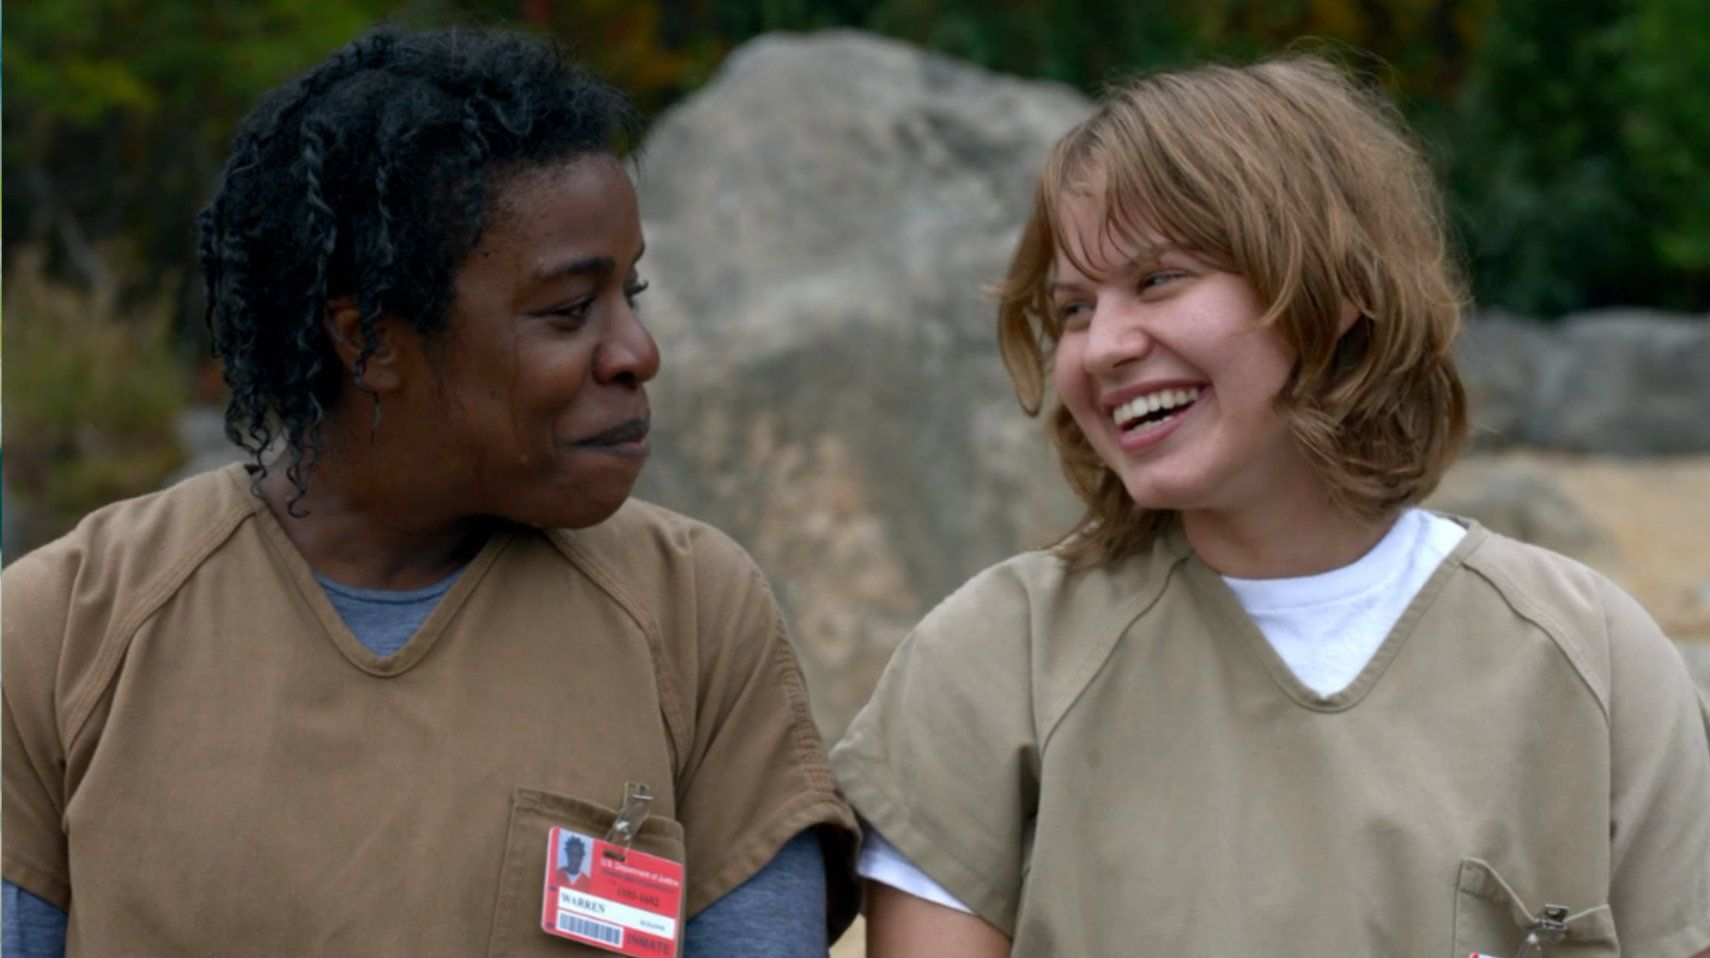 5 Of The Best Relationships On Orange Is The New Black (And 5 Of The Worst)